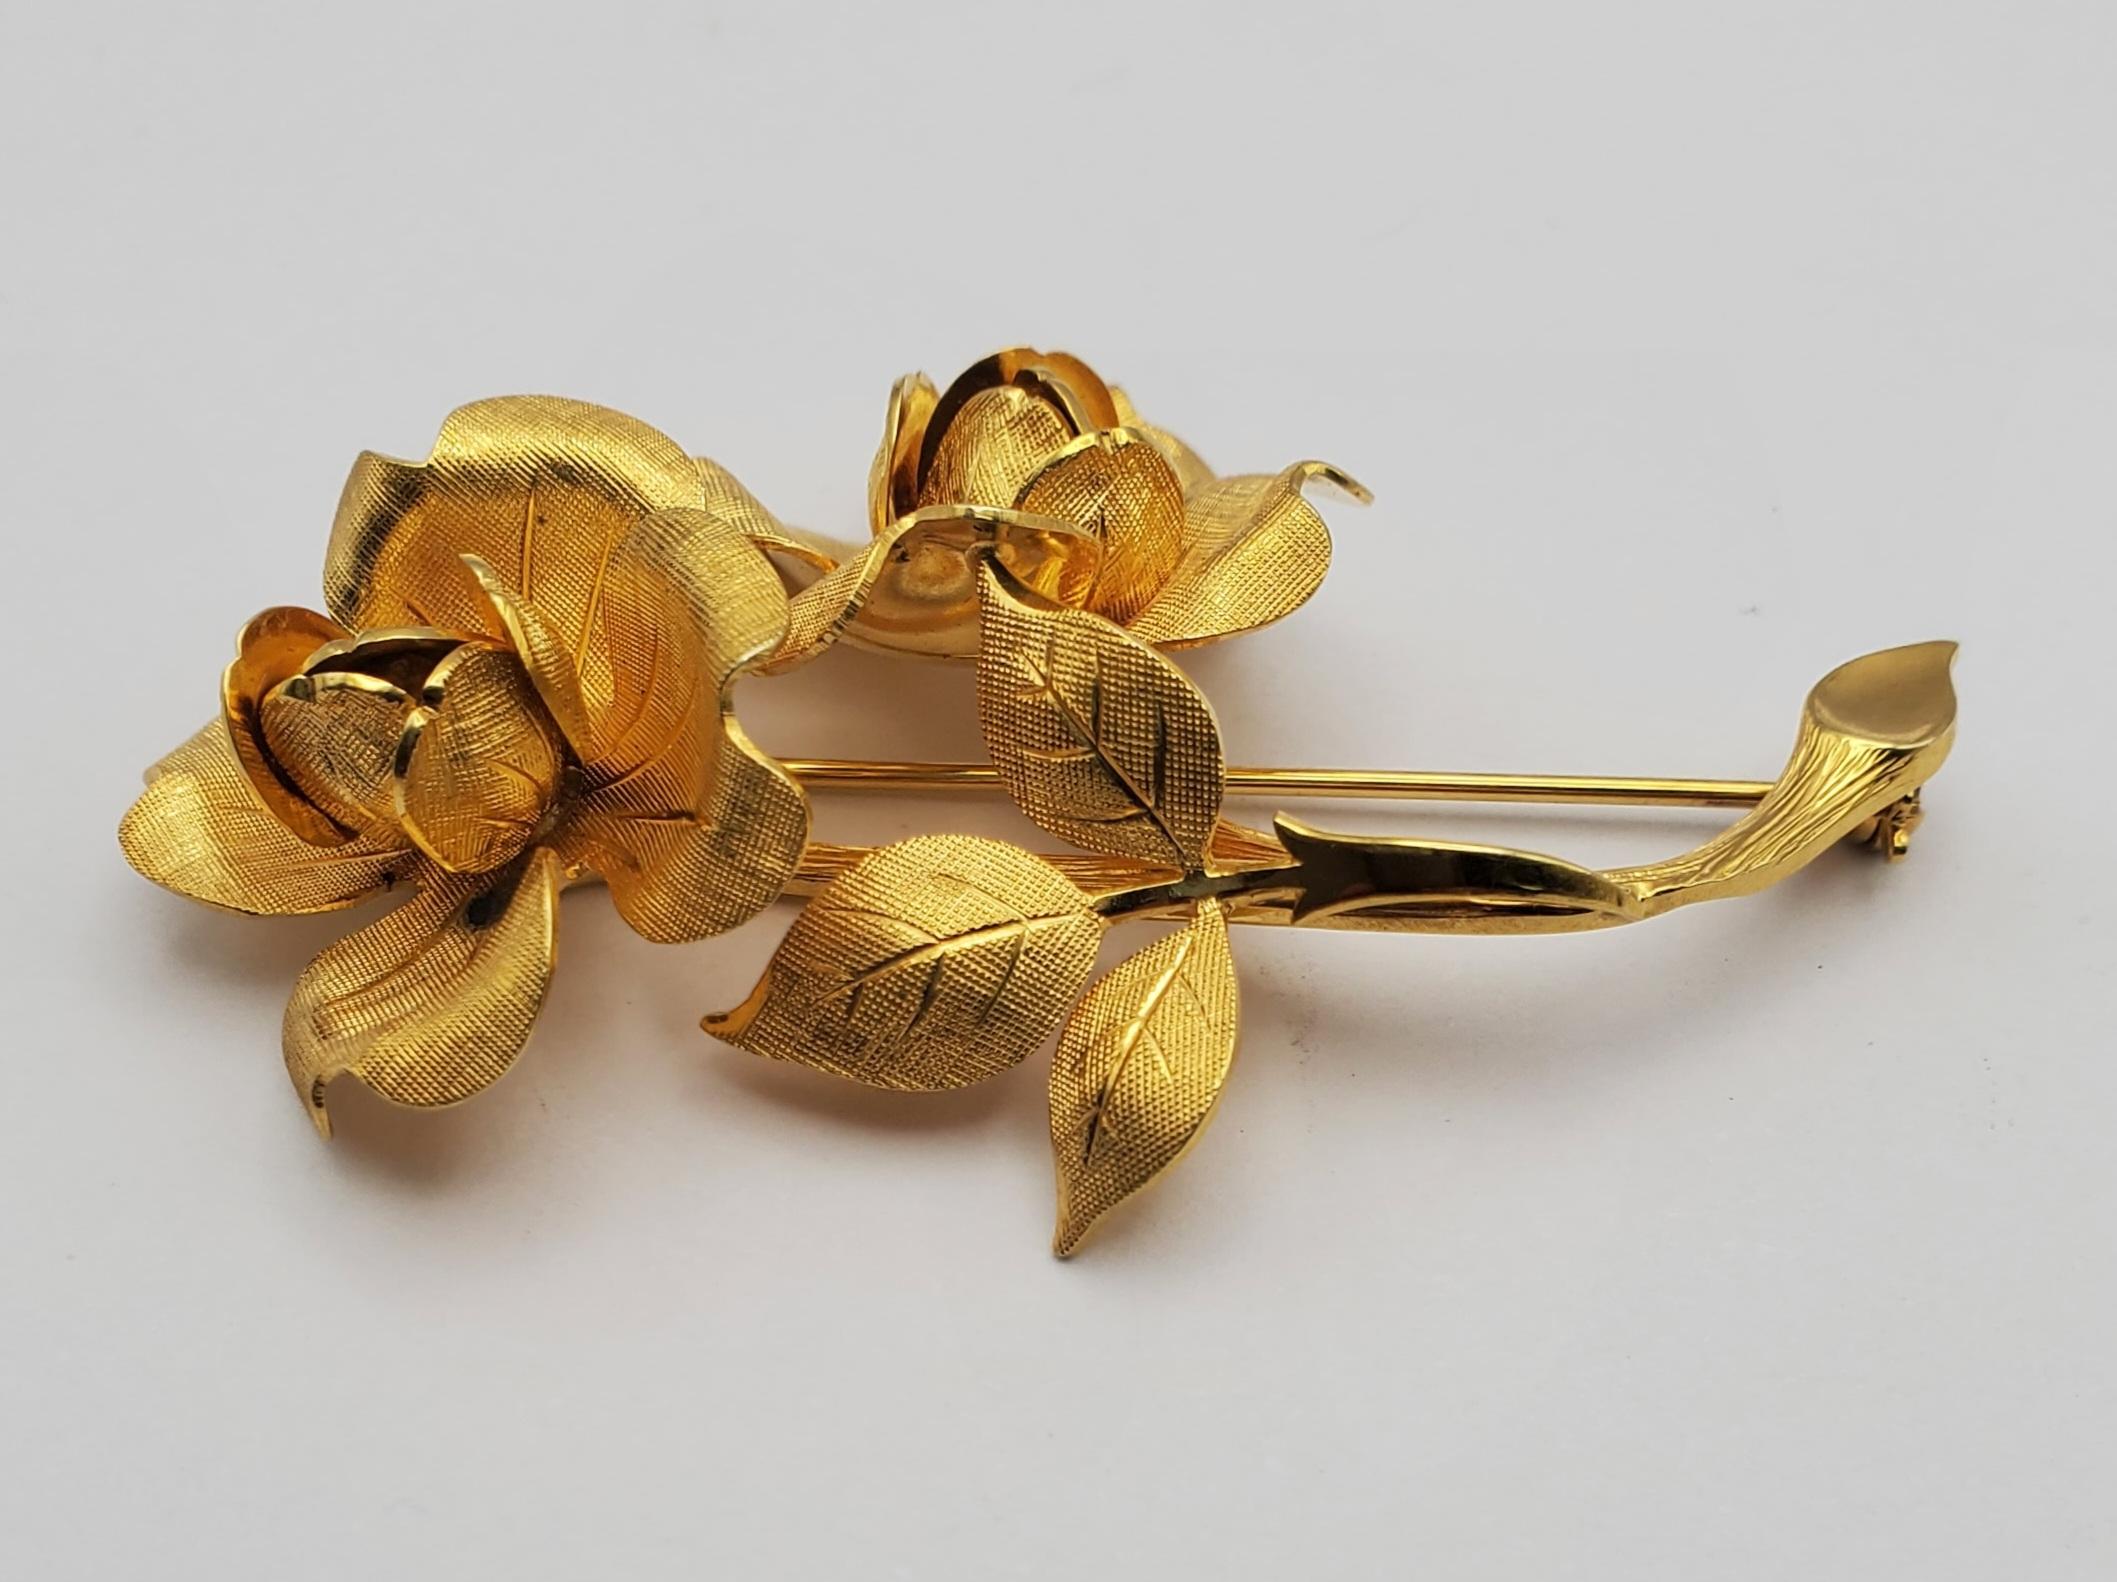 Exquisitely detailed Tiffany & Co. brooch featuring two roses in bloom crafted in 14k yellow gold. The natural beauty of the flowers is rendered wonderfully with even the veins of the leaves visible. The back of the pin features c-lock mechanism for